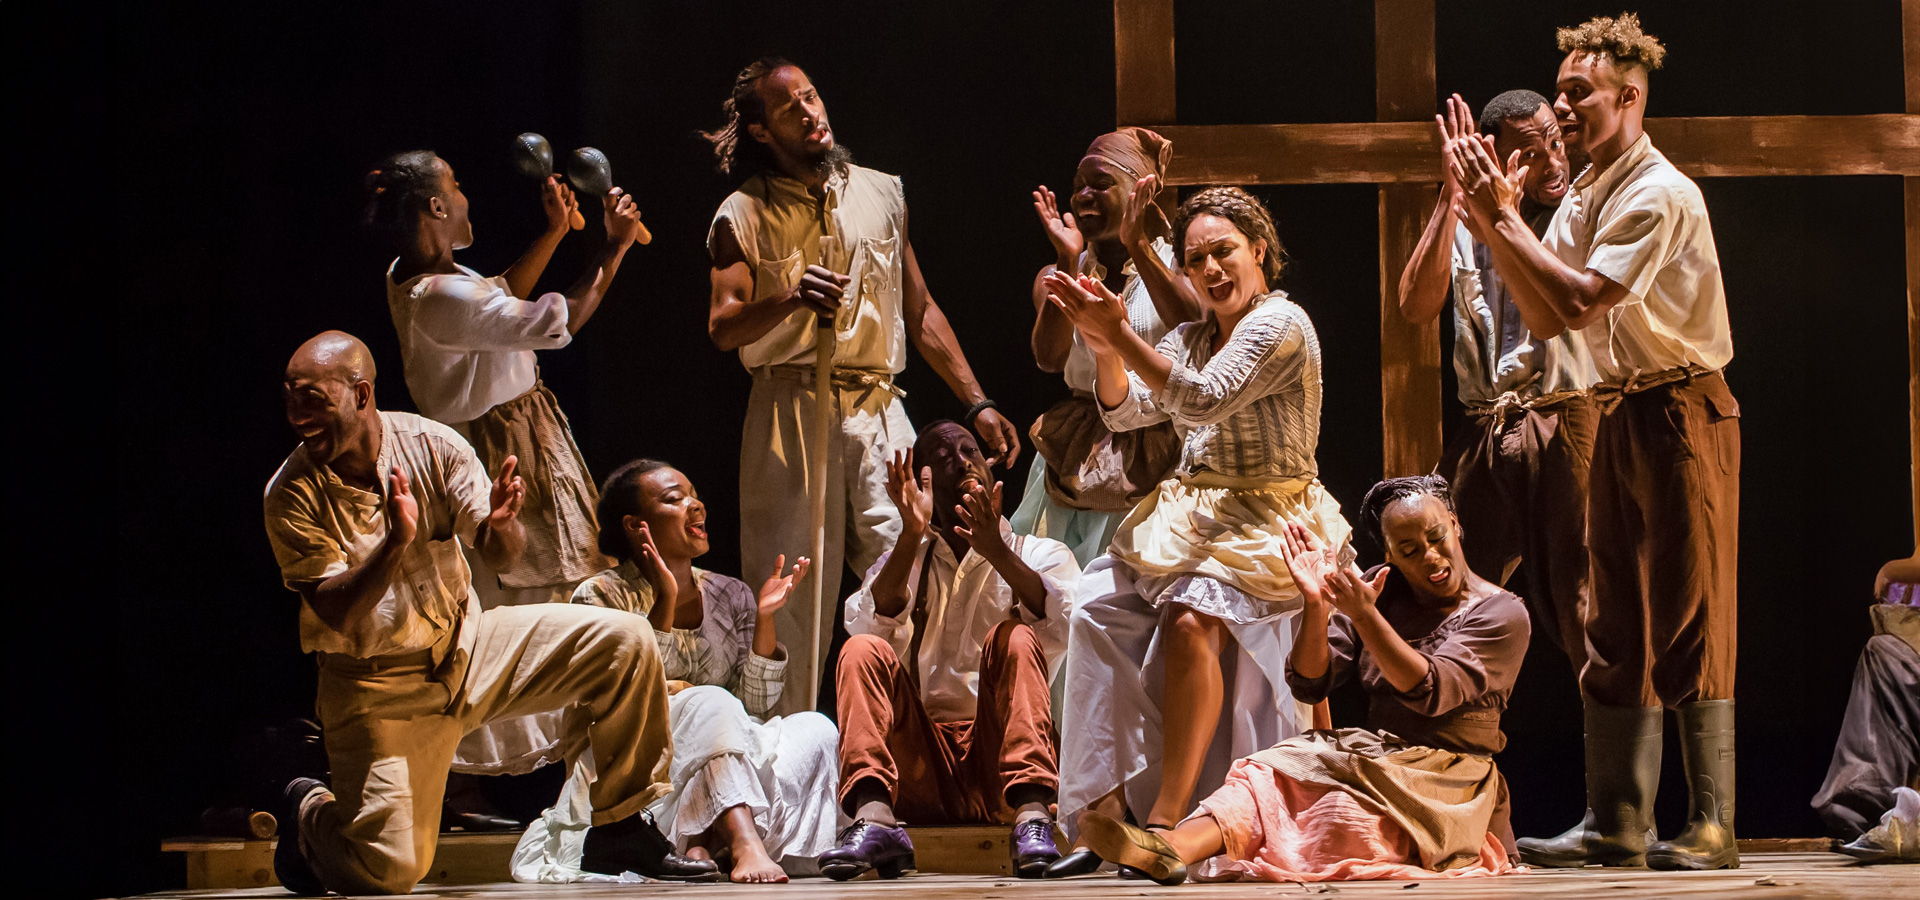 The Step Afrika! group of African American performers stand together on stage, expressively singing and clapping in unison.